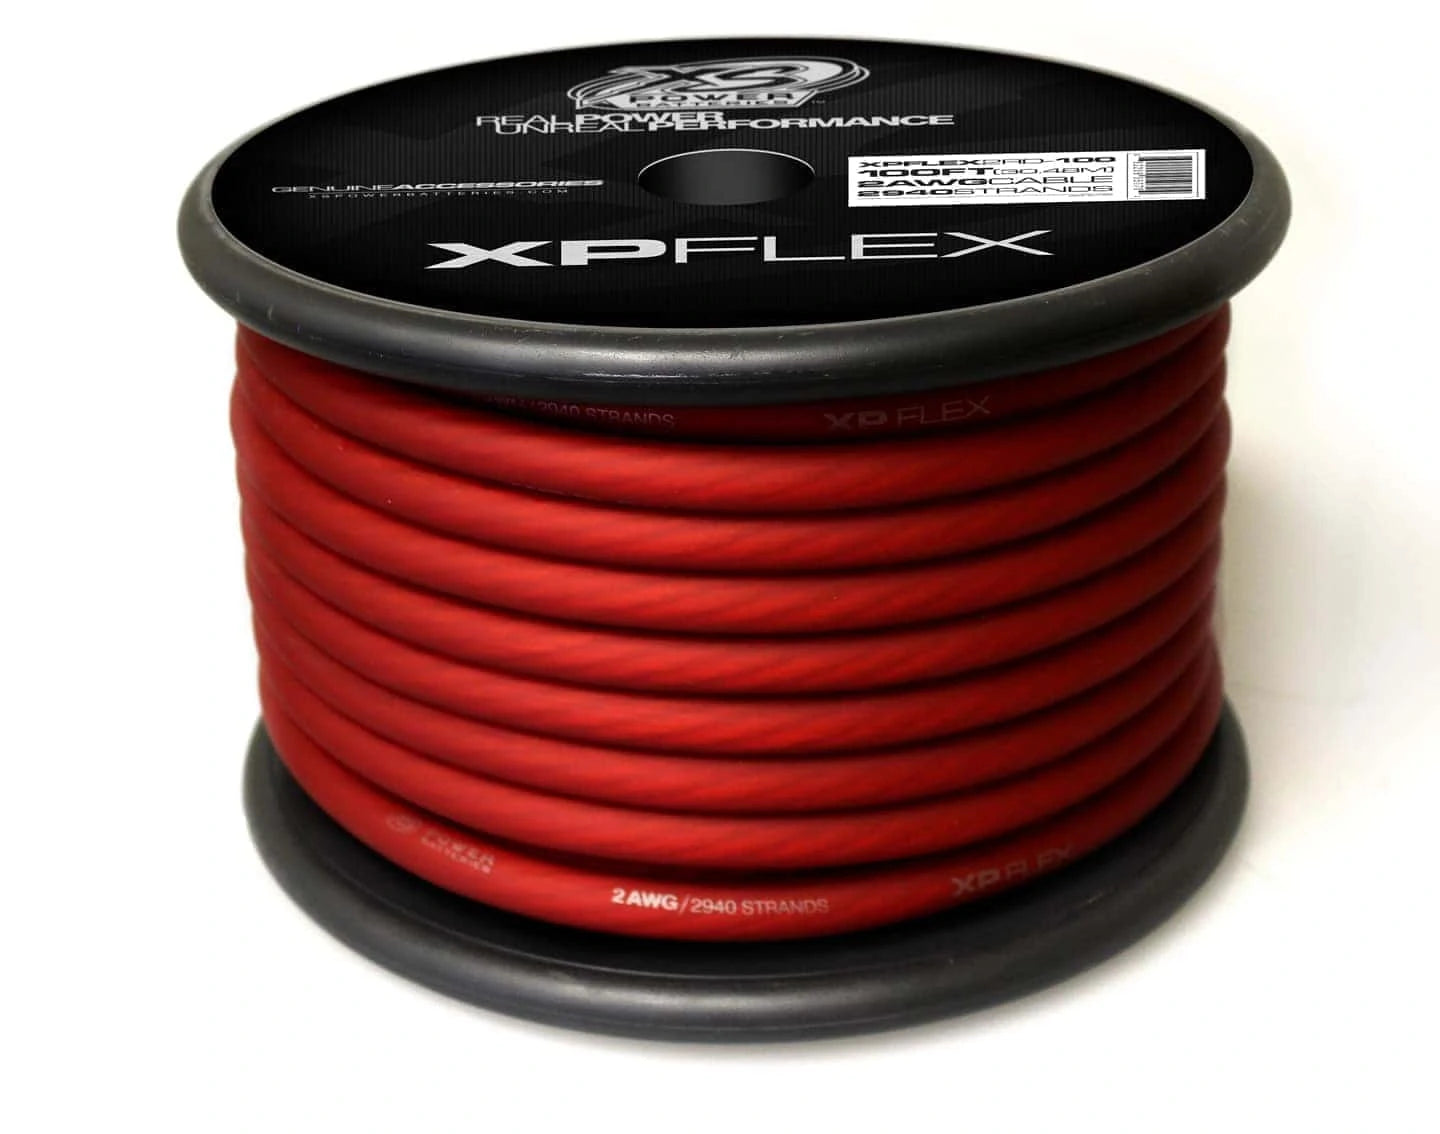 XS Power 2 AWG Gauge XP Flex Car Audio Power and Ground Cable 100ft Spool Electrical Wire